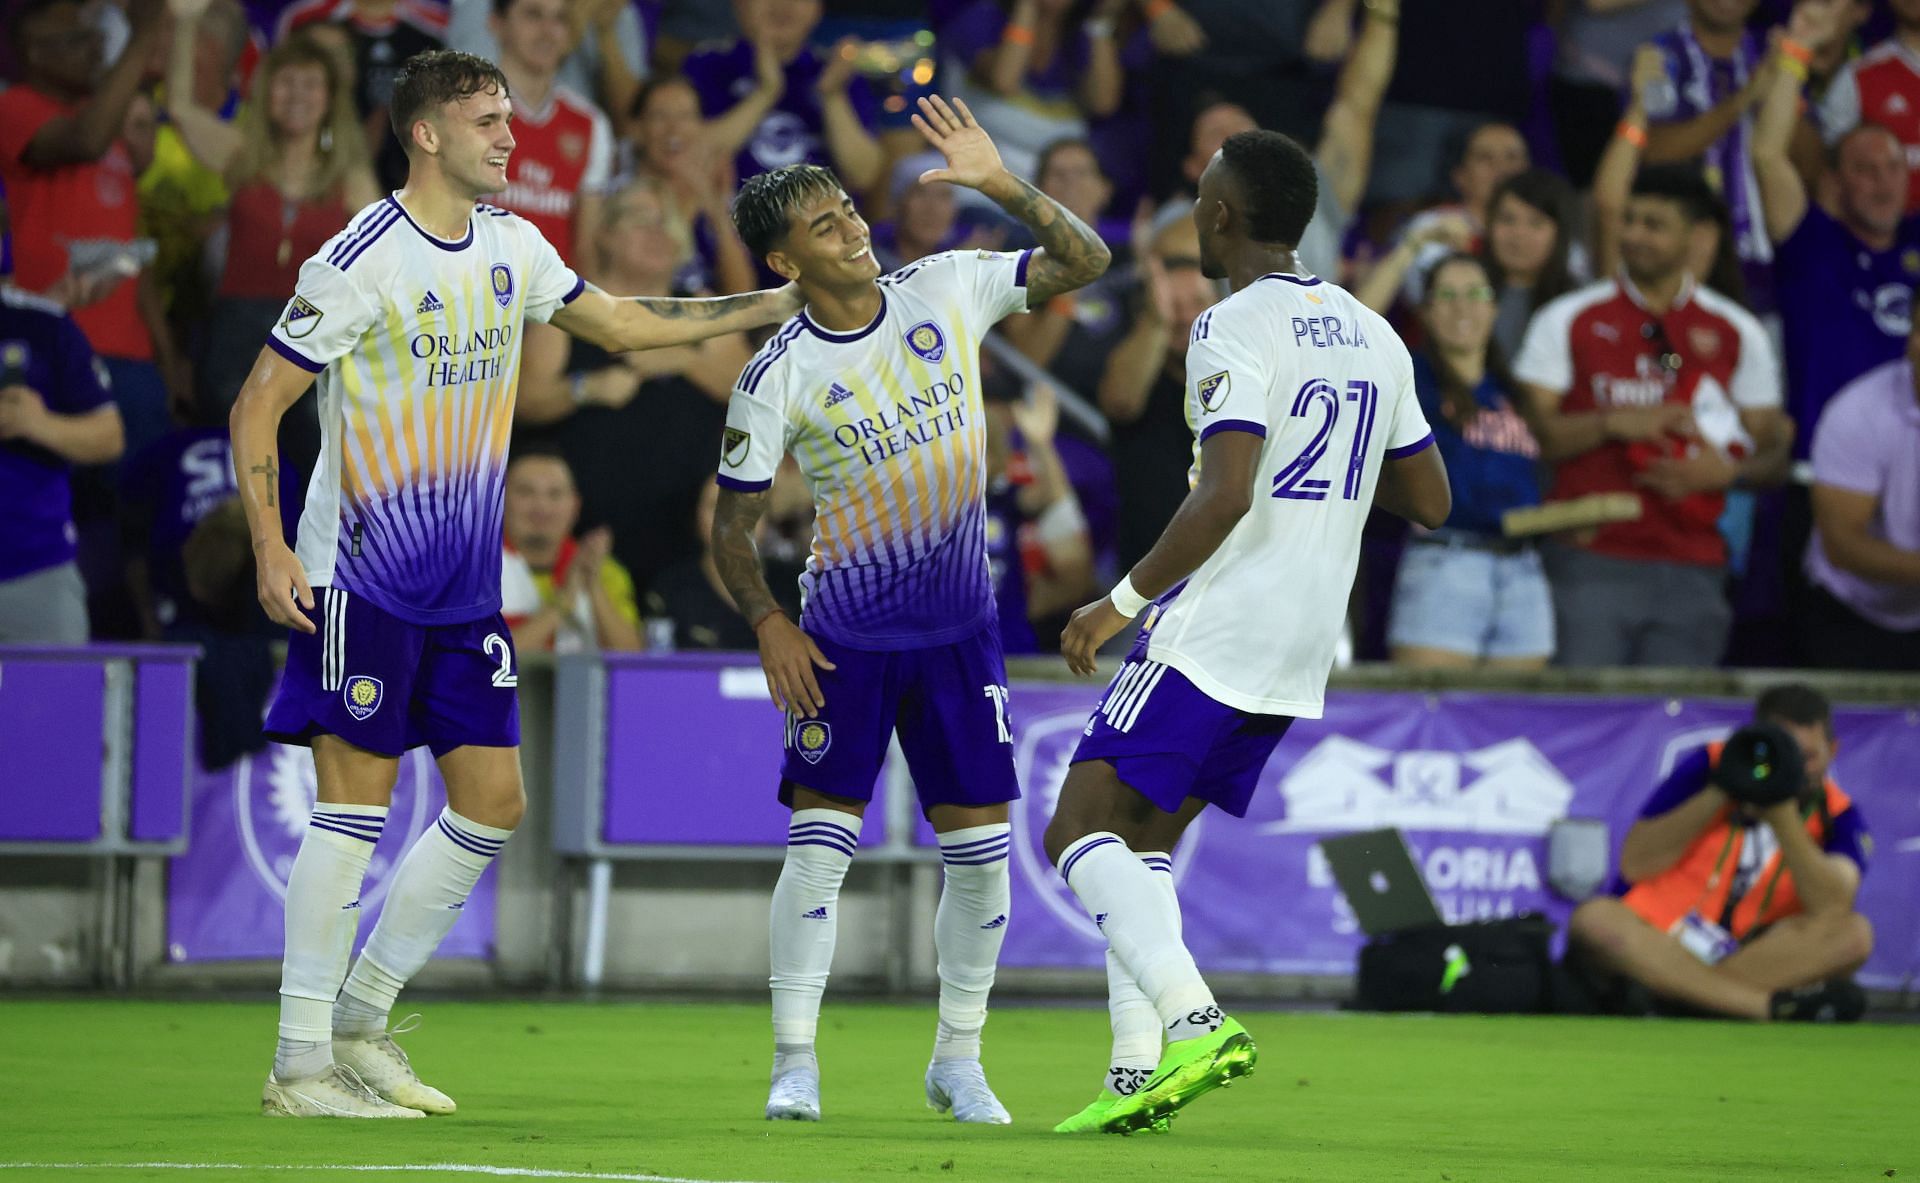 Orlando City take on DC United this weekend